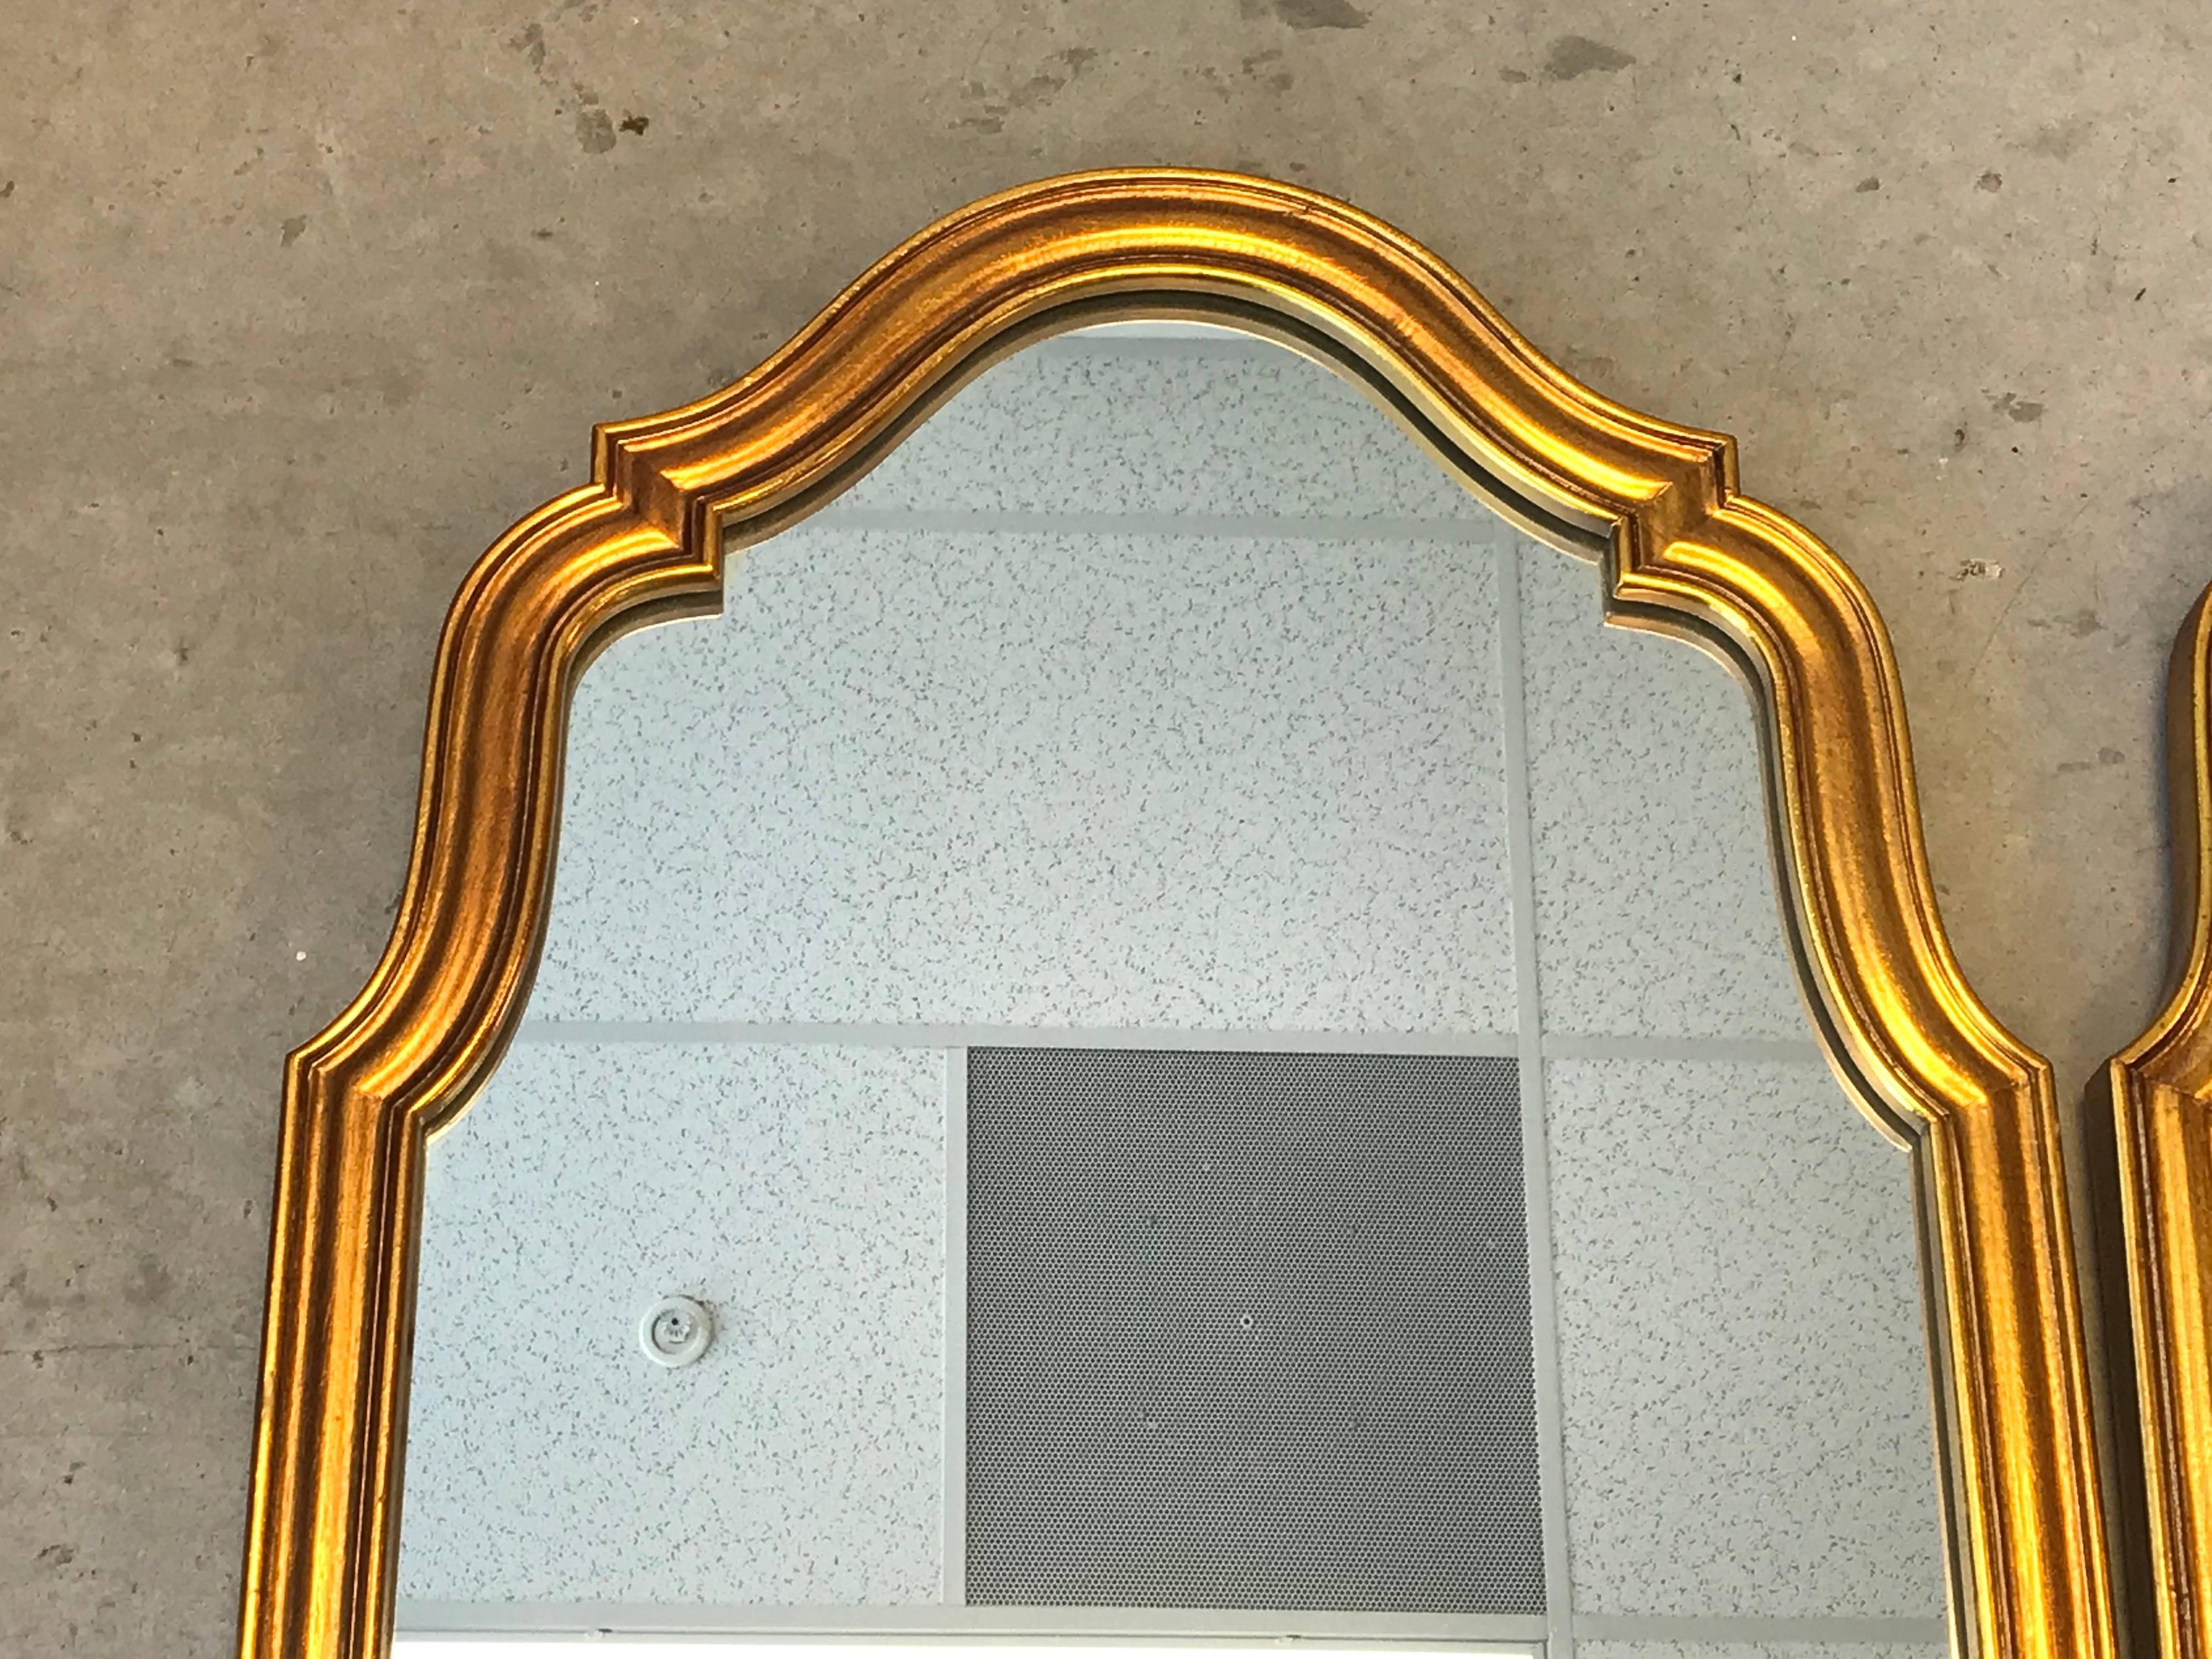 Offered is a gorgeous, pair of 1970s Italian Florentine gilded on resin mirrors. Heavy.